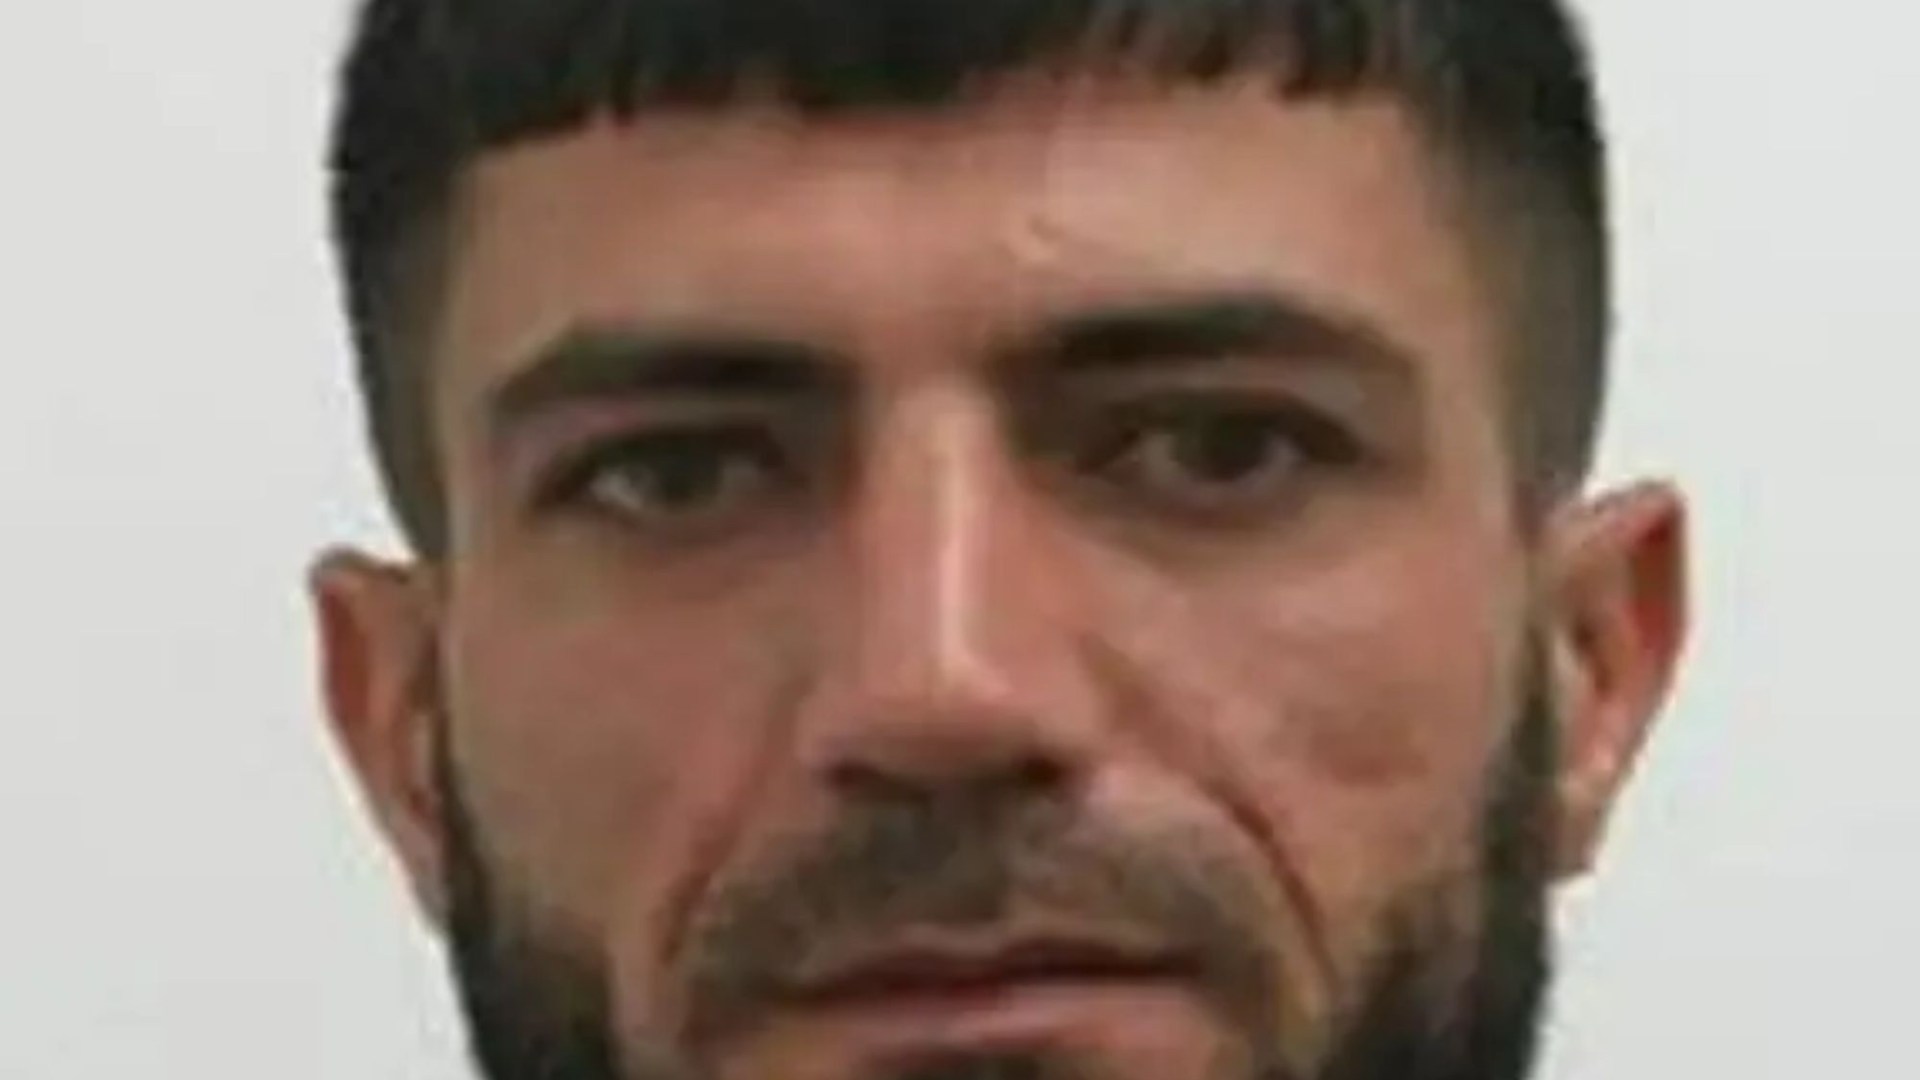 Europes most wanted people smuggler ‘The Scorpion’ ARRESTED days after being exposed for ‘trafficking 10,000 to the UK’ [Video]